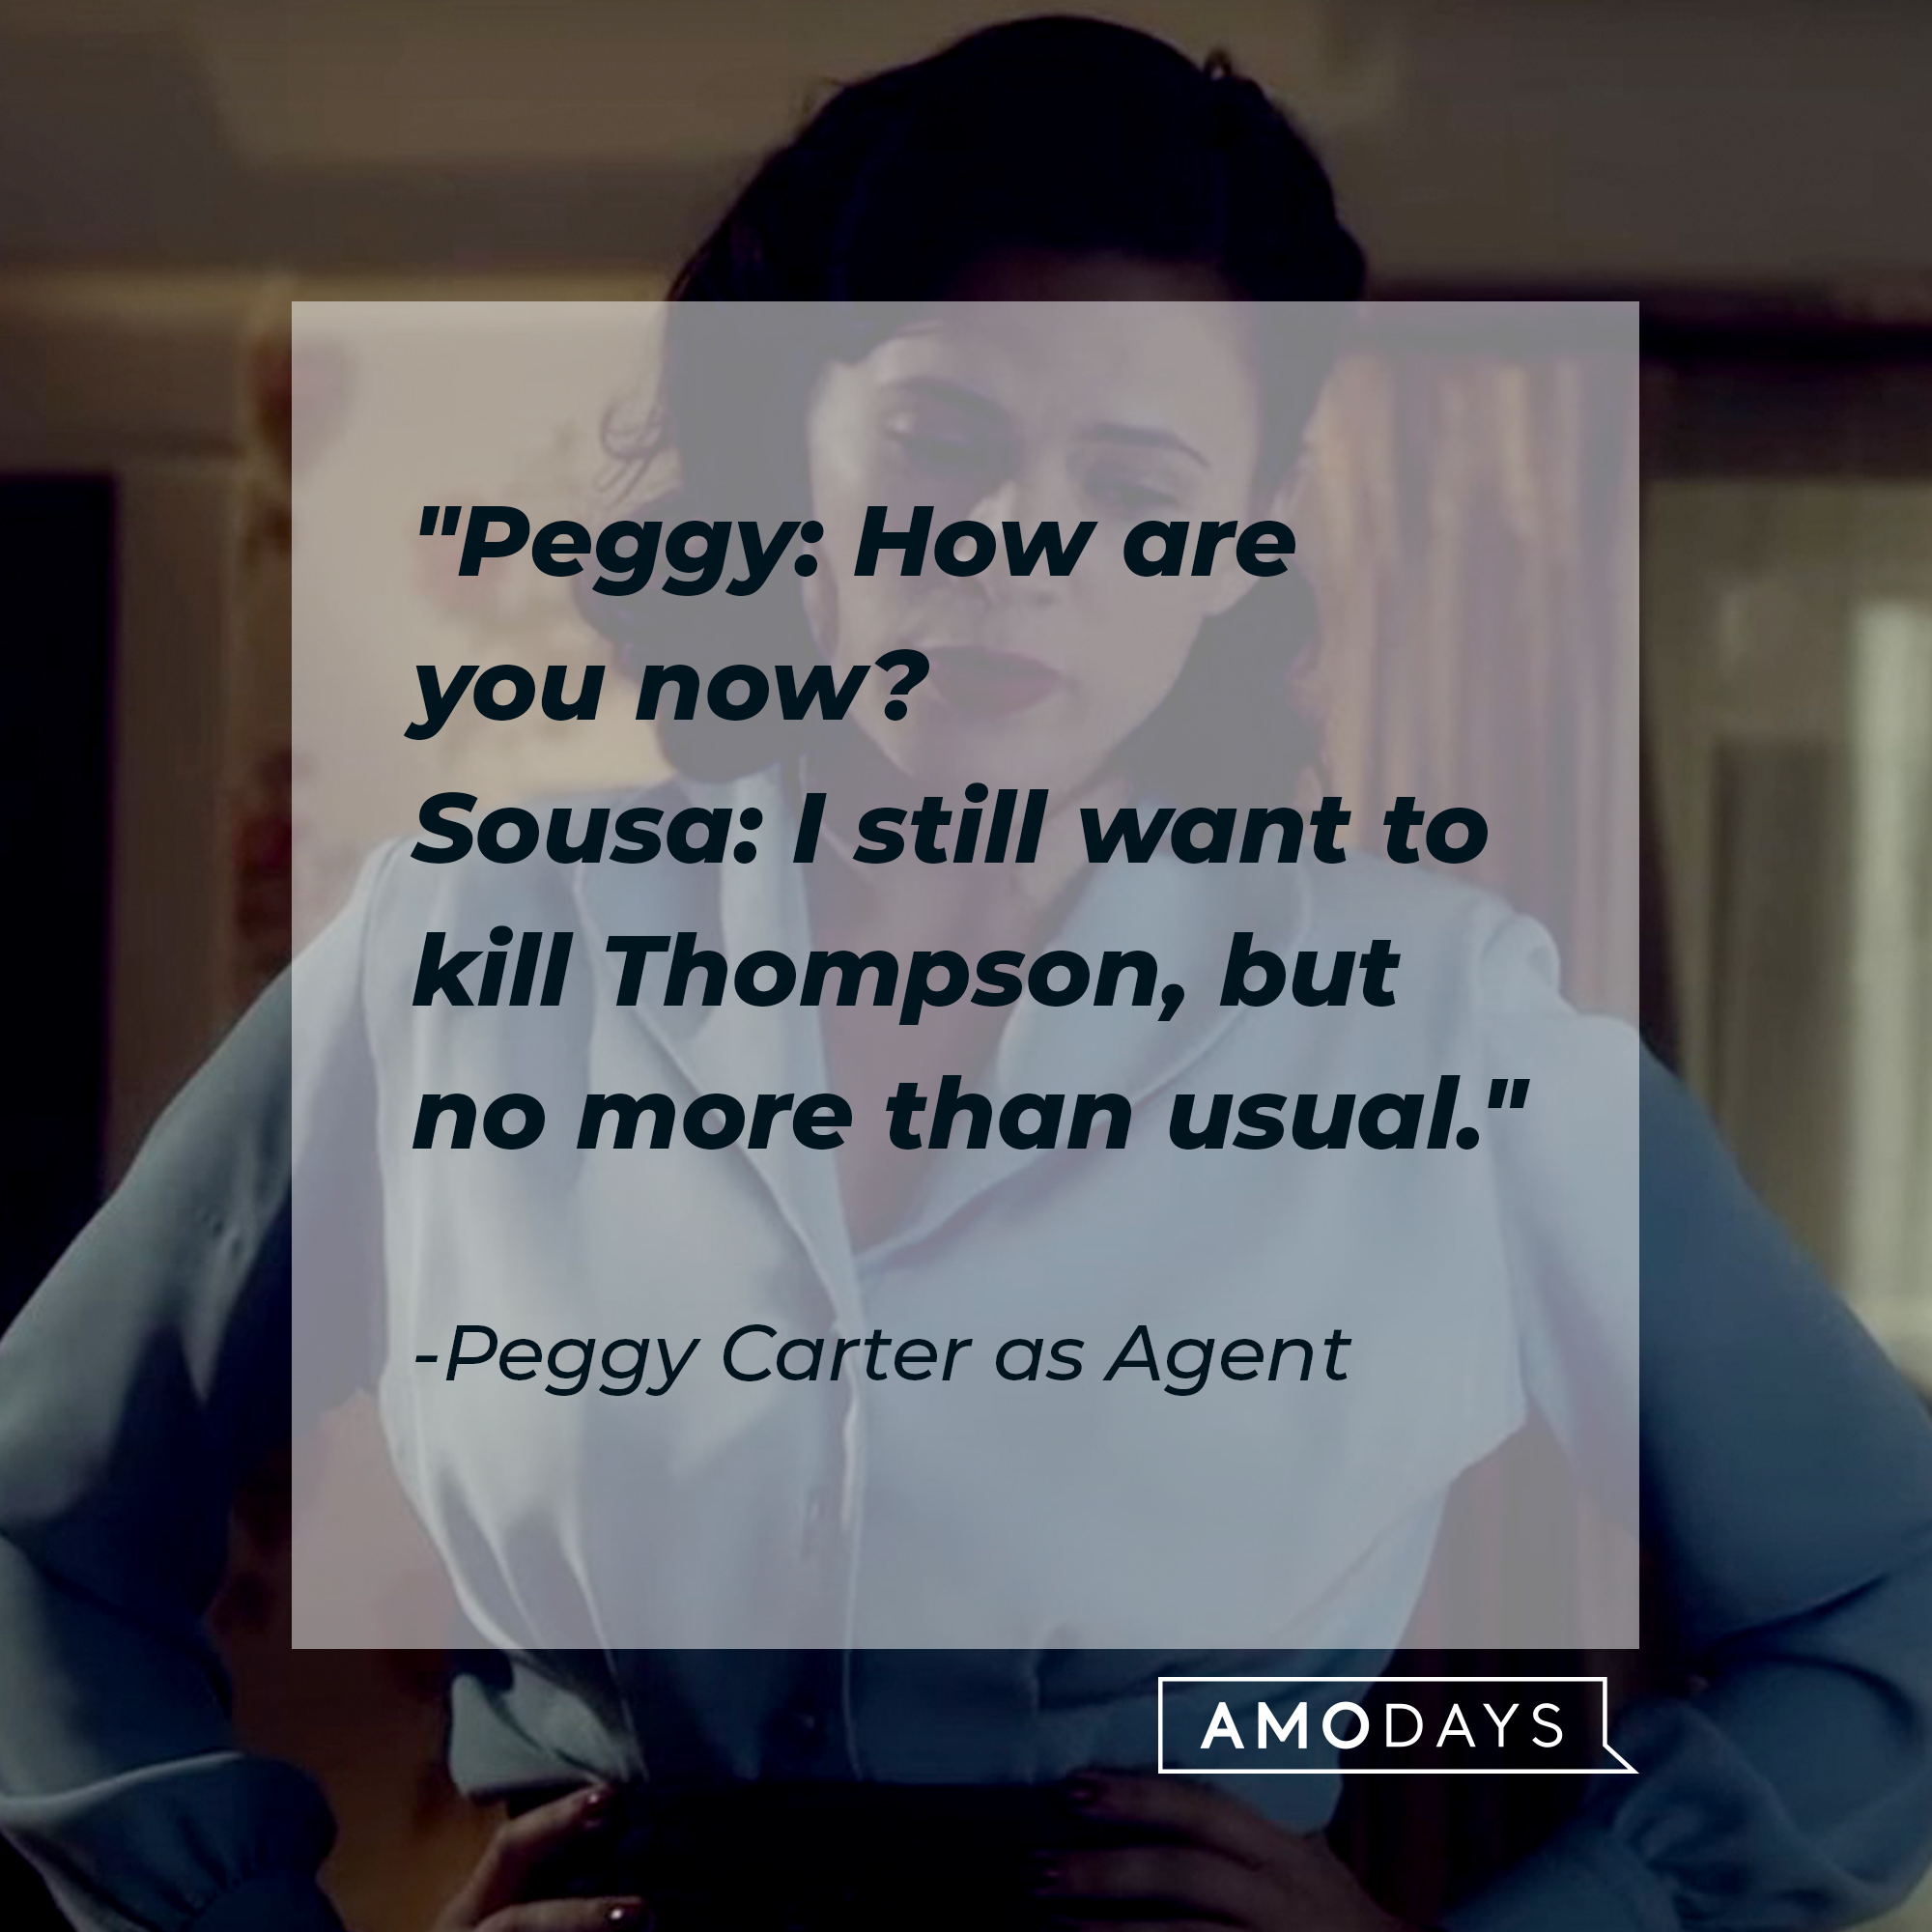 Peggy Carter as Agent's quote: "Peggy: How are you now? Sousa: I still want to kill Thompson, but no more than usual." | Source: Facebook.com/marvelstudios